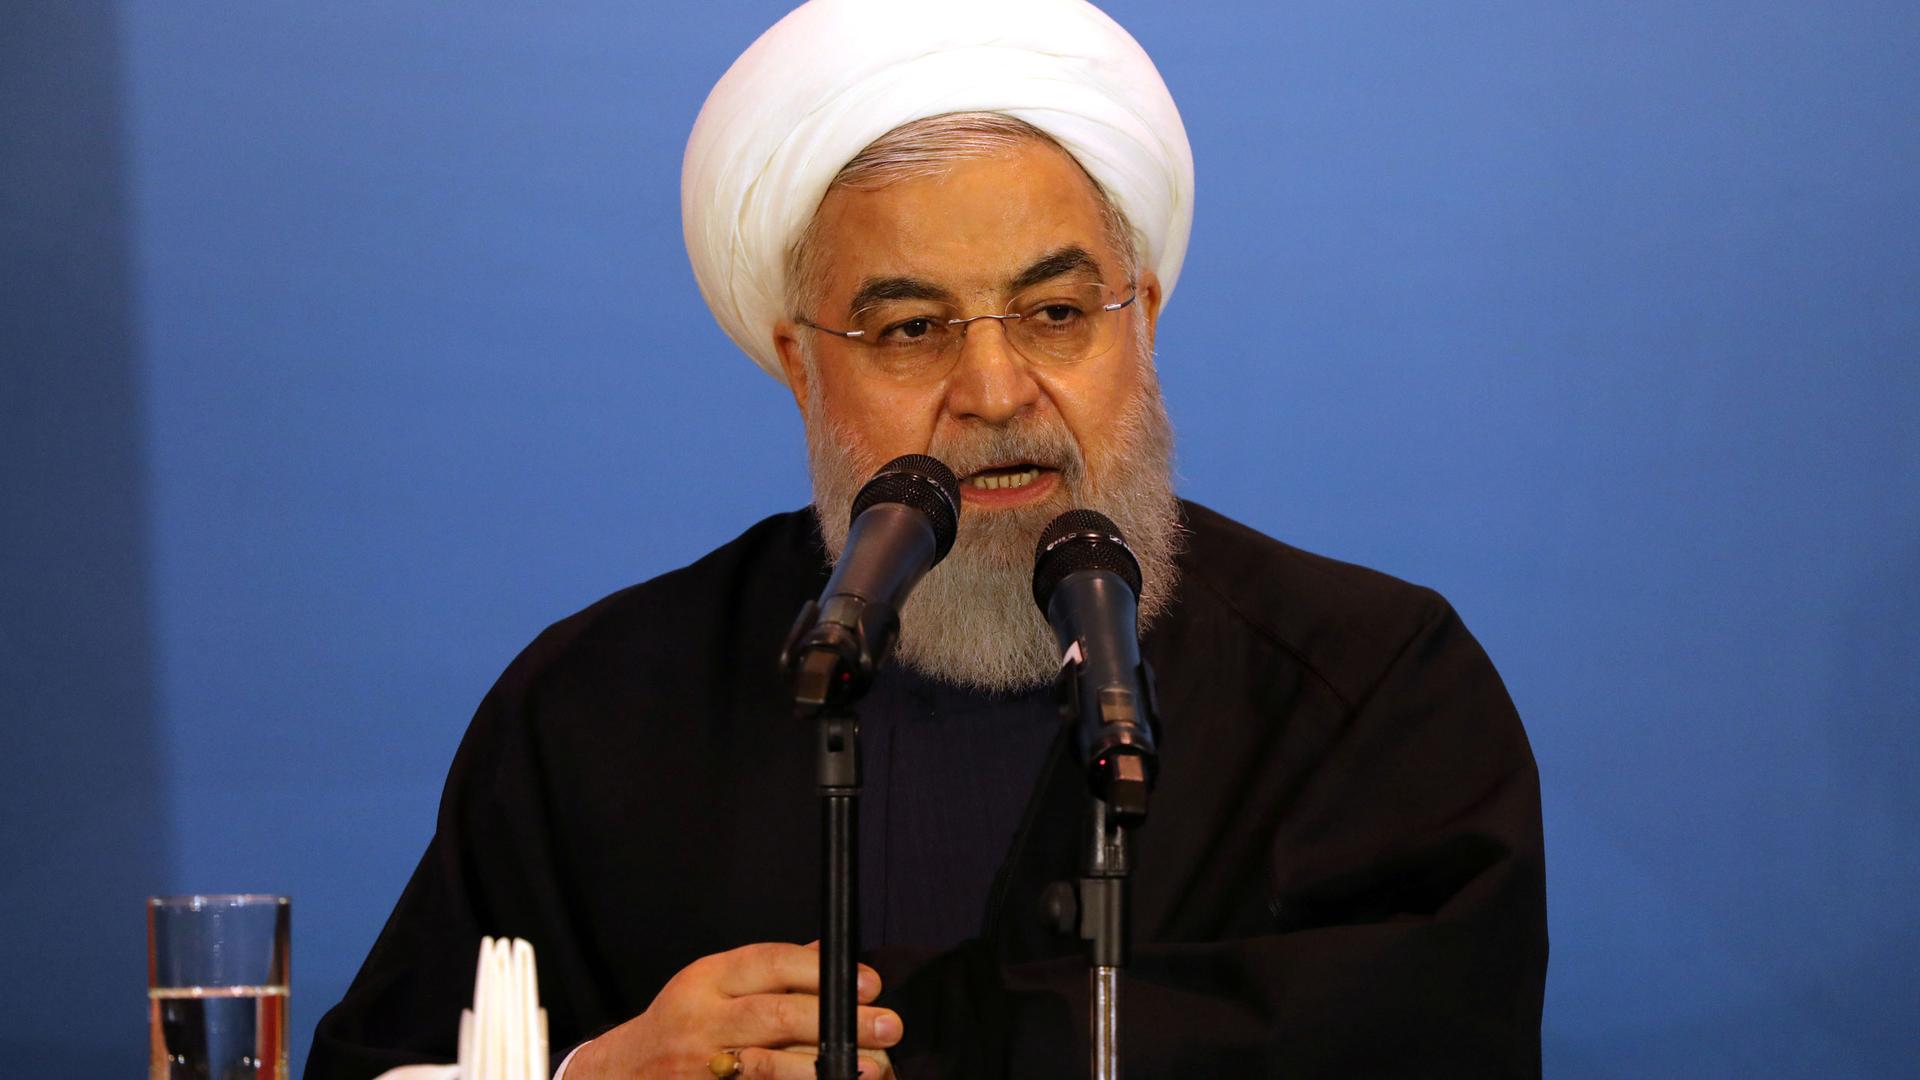 Iranian President Hassan Rouhani is shown sitting at a table with a glass of water speaking behind two microphones.